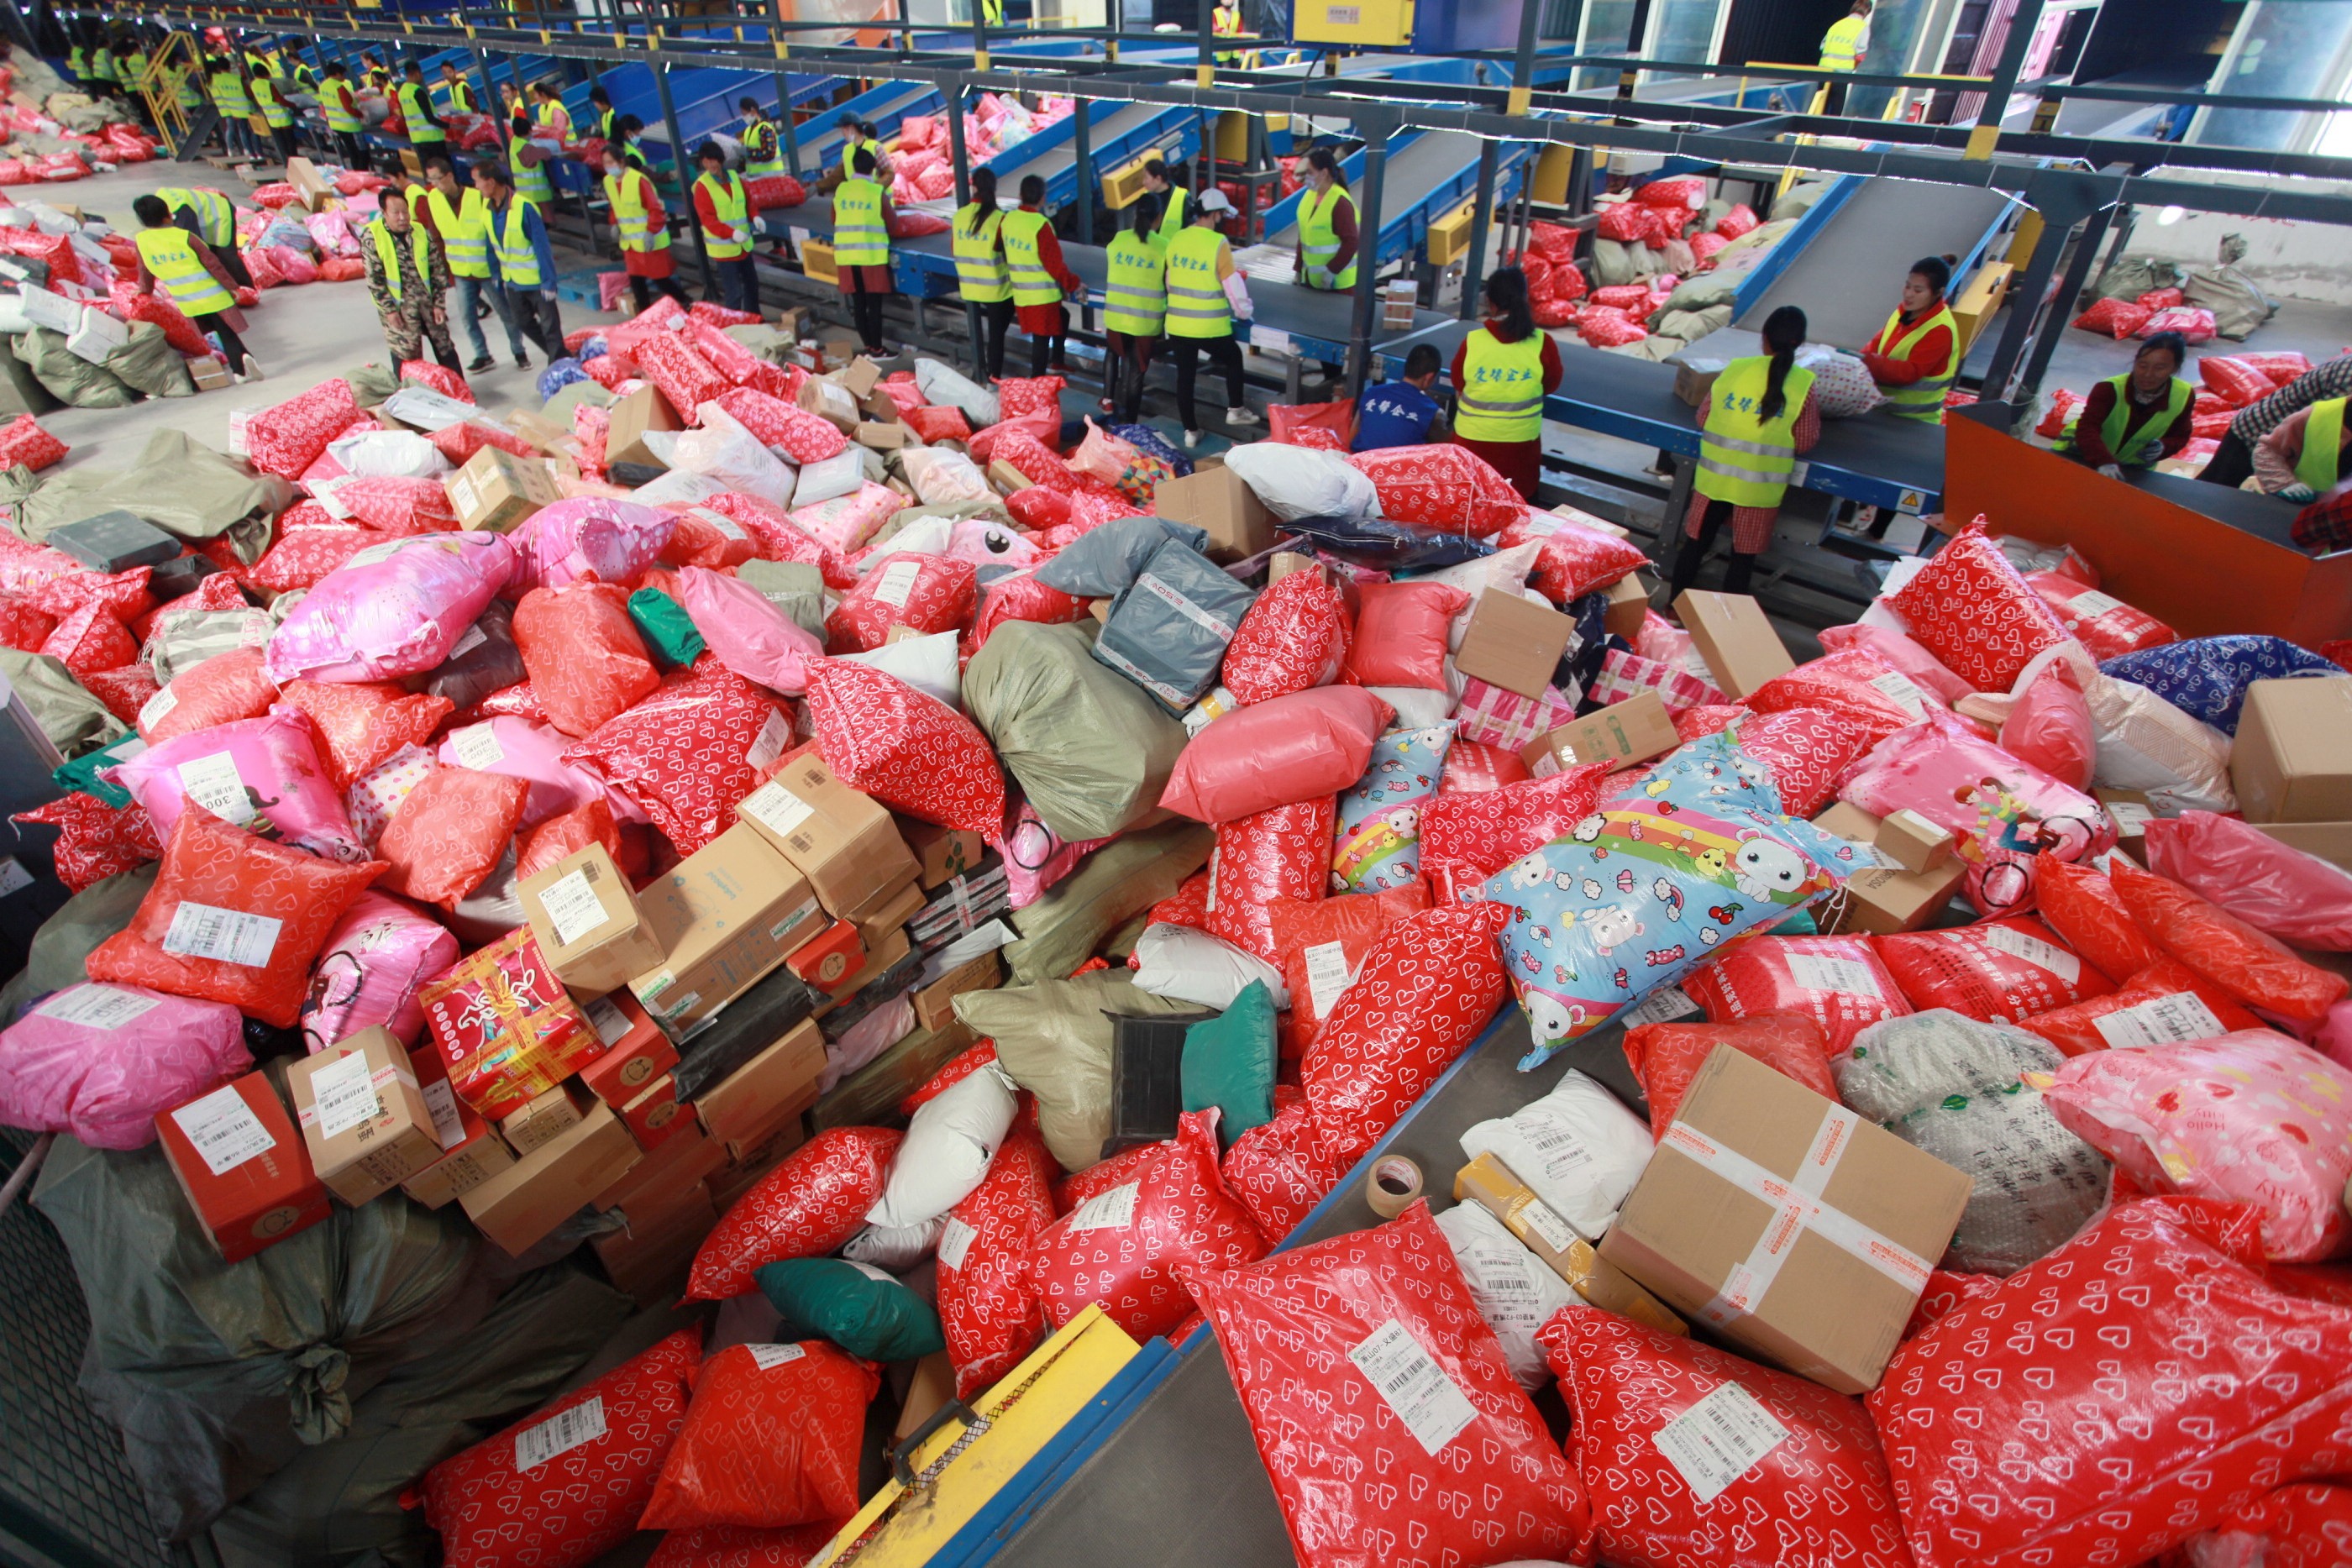 Workers sort packages at a mail processing center on Singles' Day 2019 in Yangzhou City, China. Photo: EPA-EFE